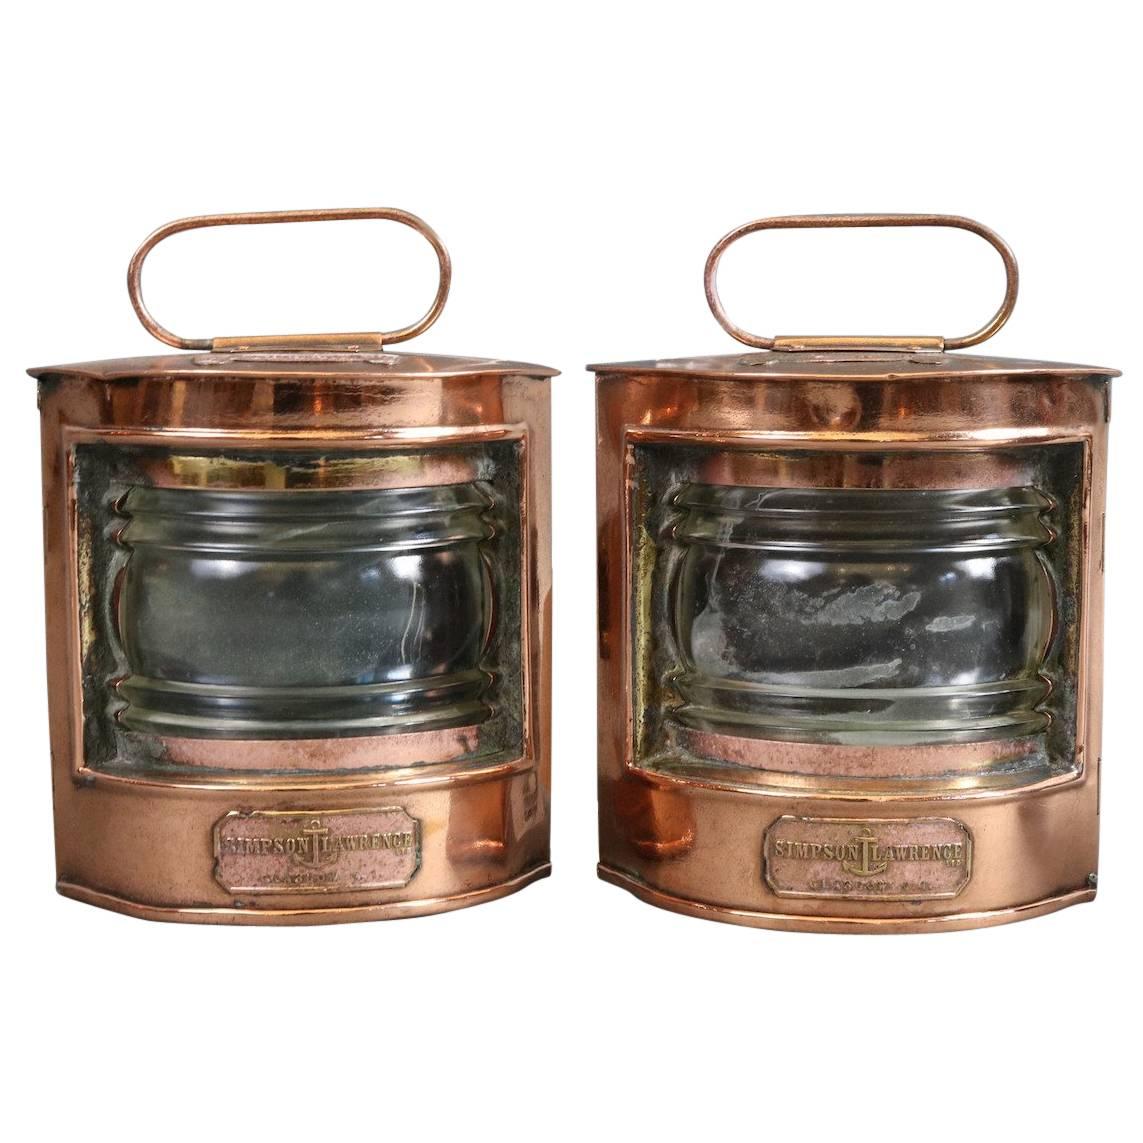 Pair of Copper Port and Starboard Lanterns